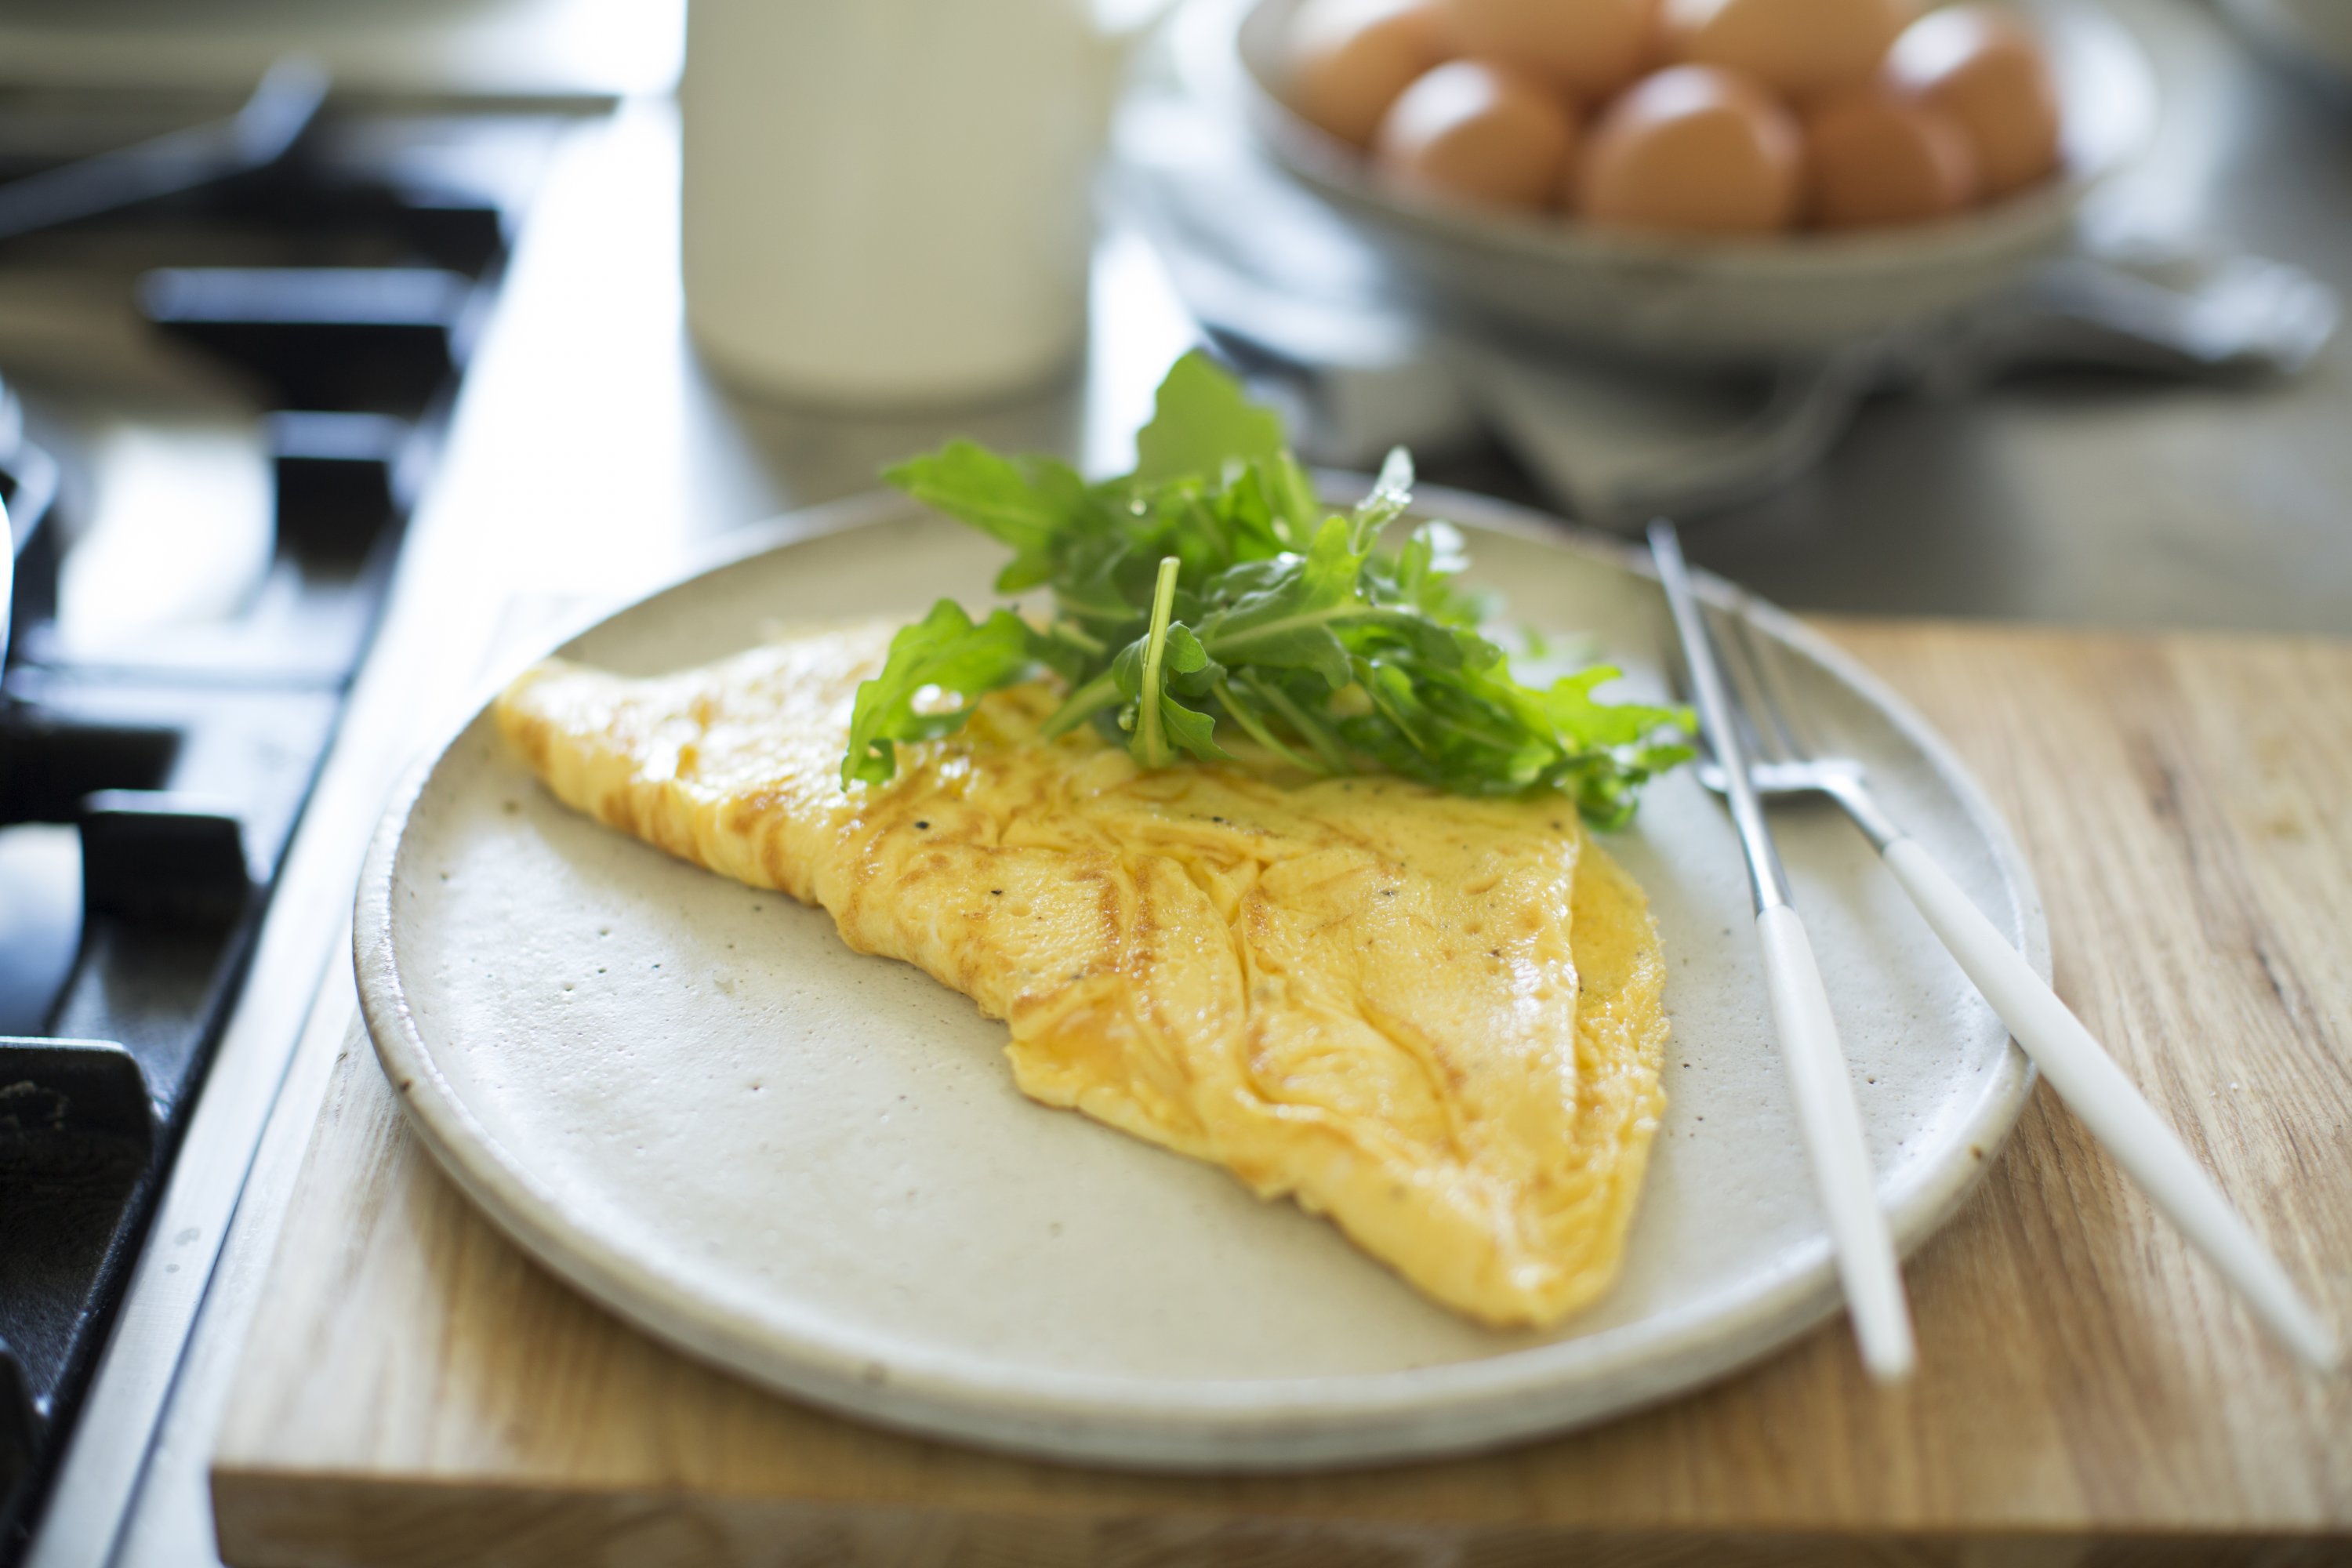 How To Make An Omelette Using The Perfect Omelette Pan